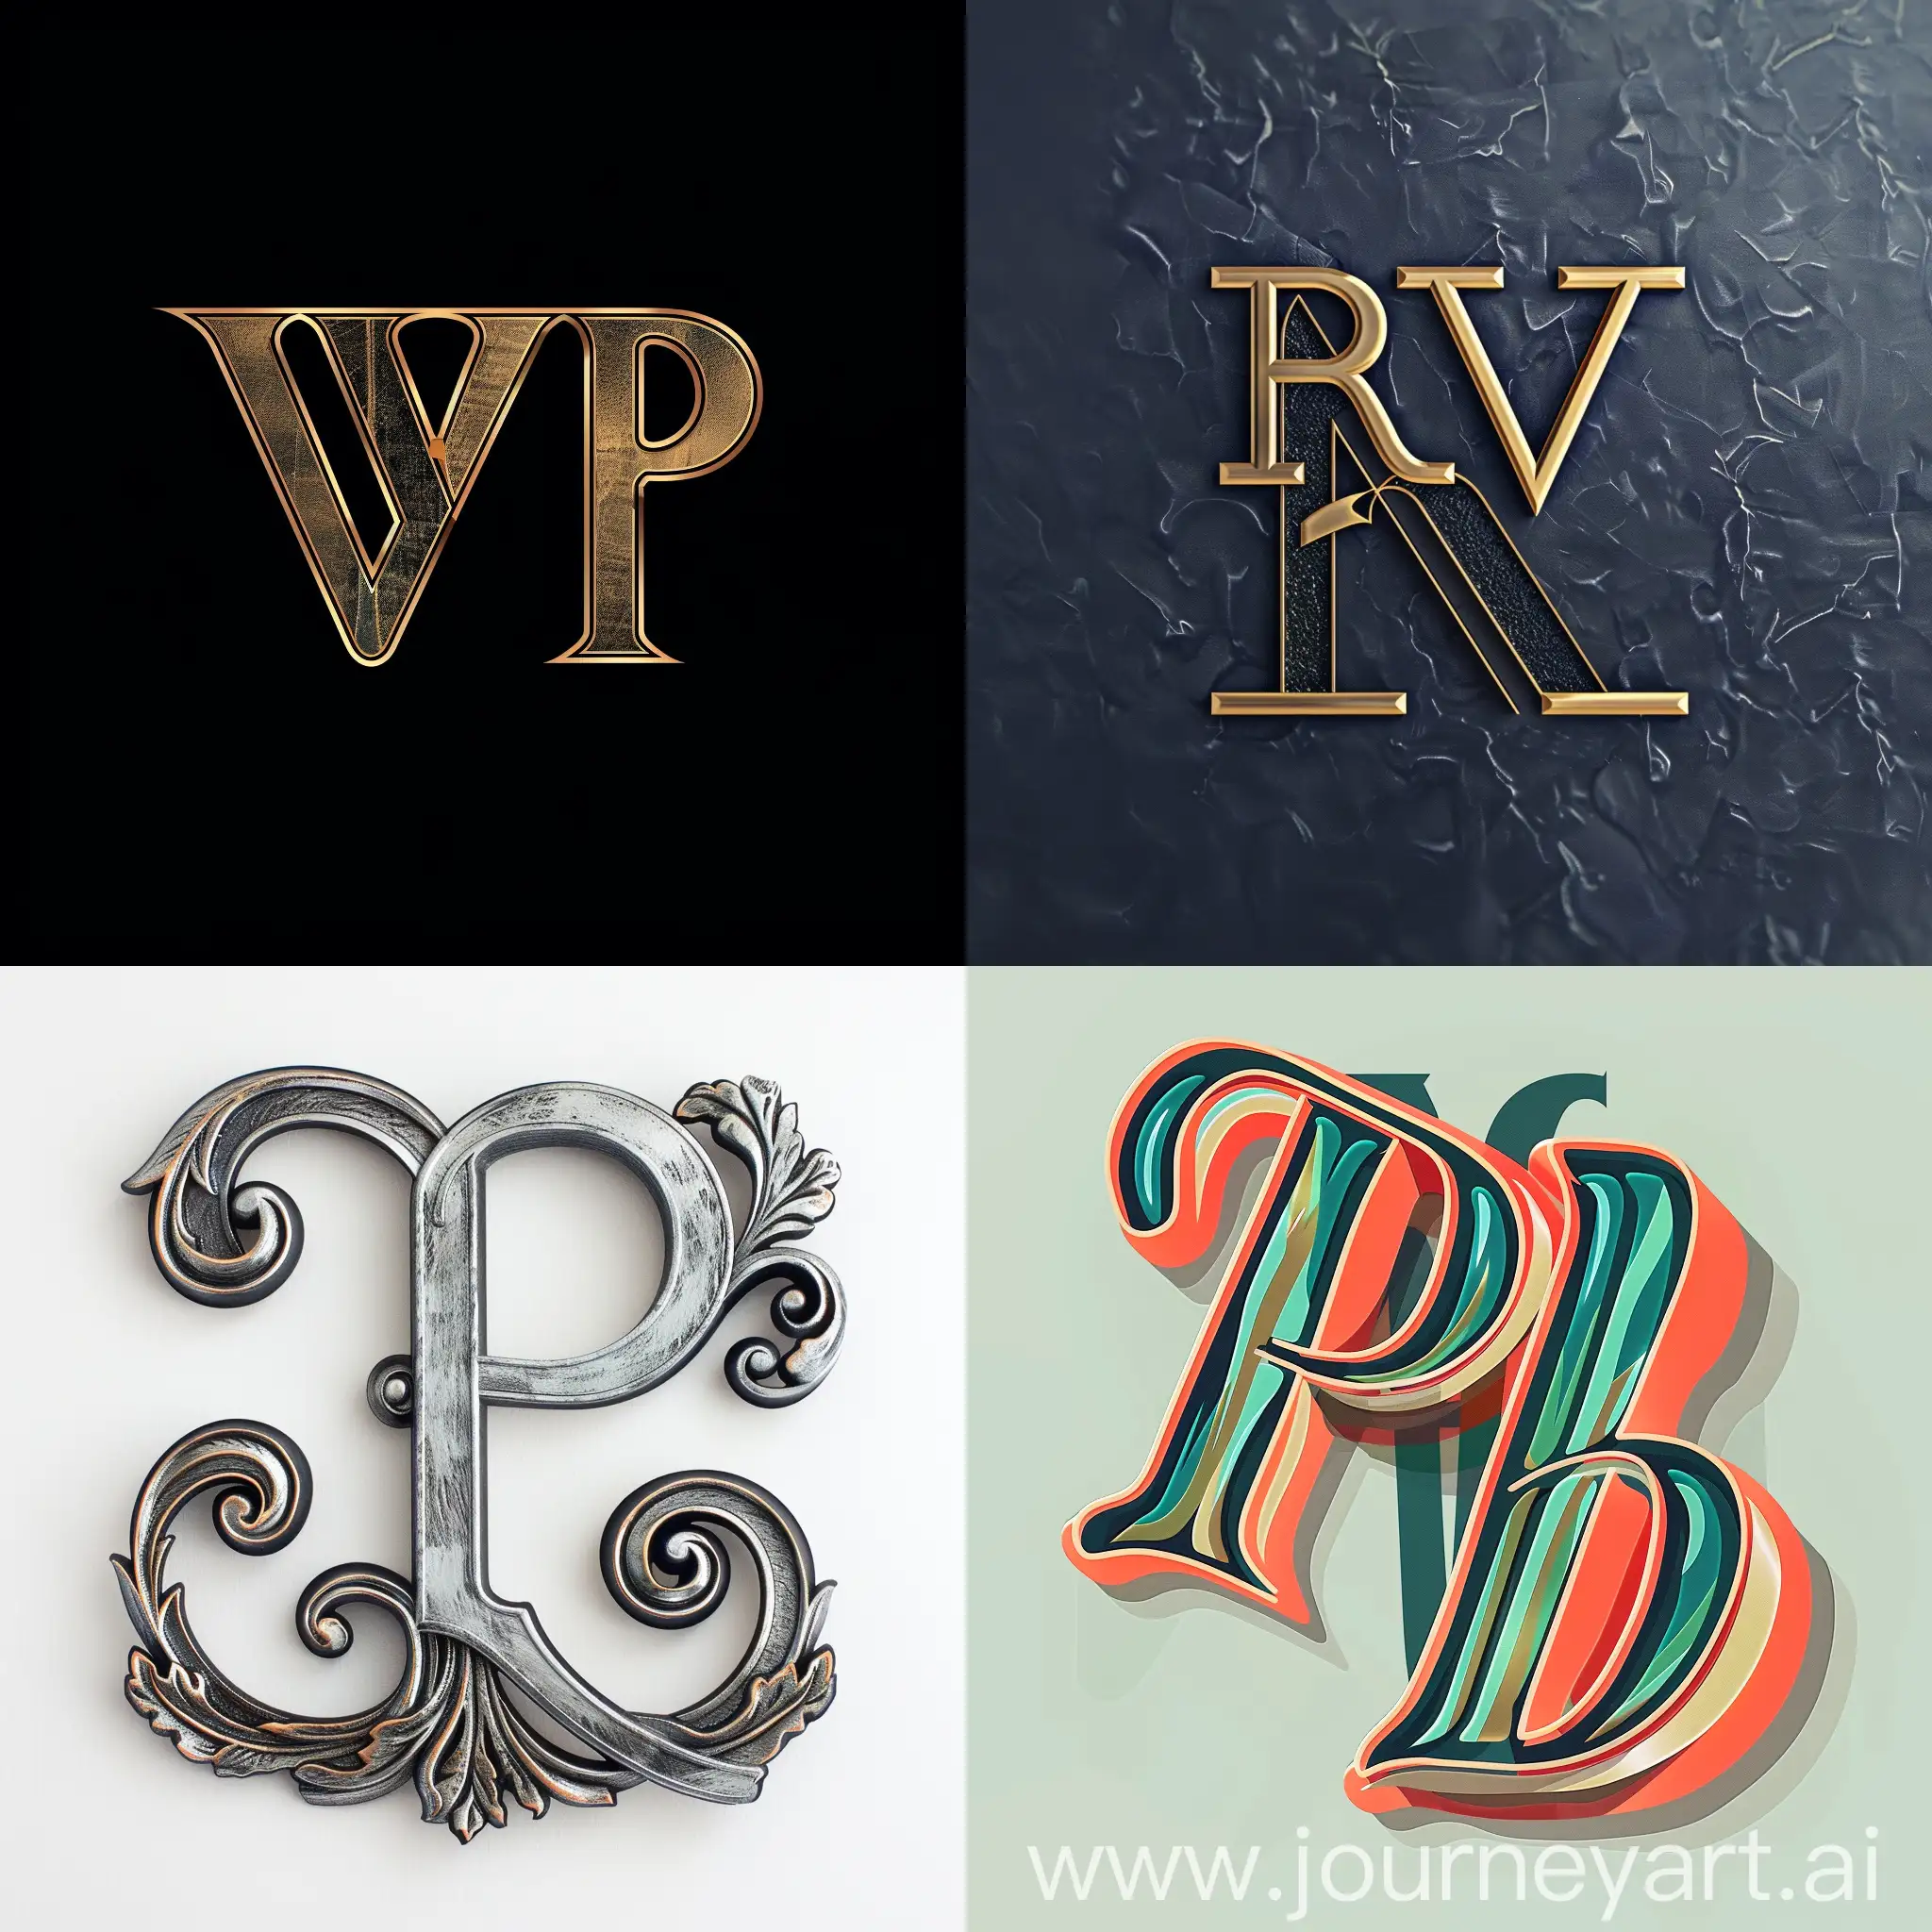 Monogram with the letters P, v and R